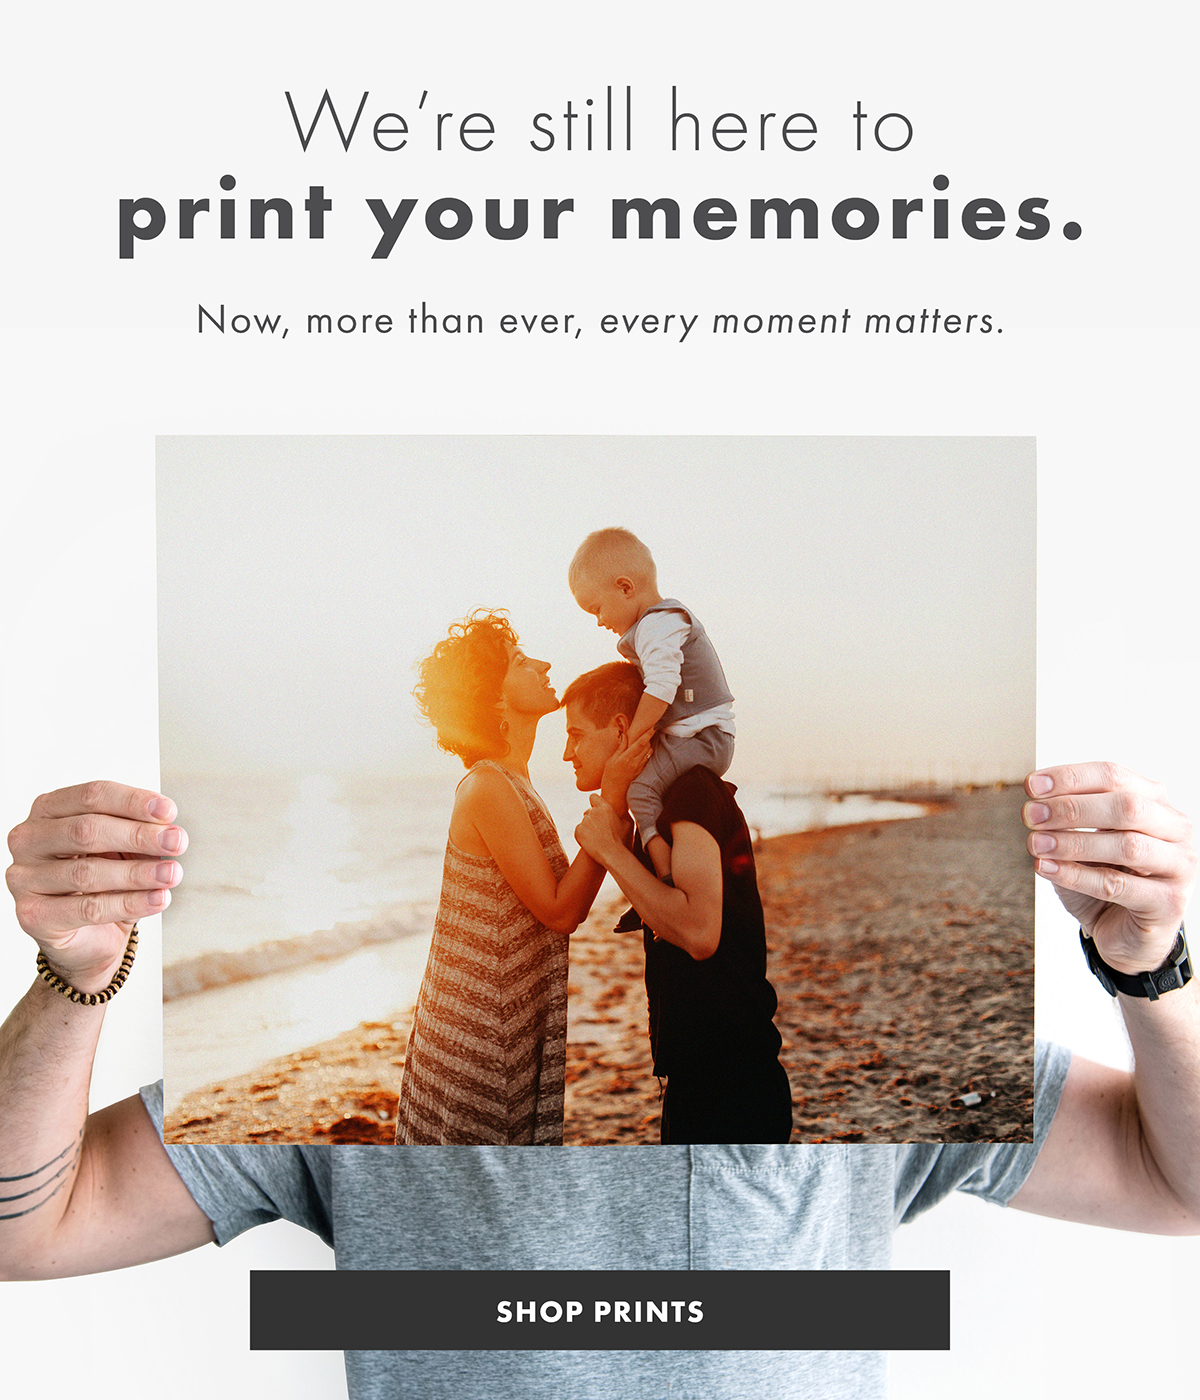 We're still here to print your memories. Now, more than ever, every moment matters.